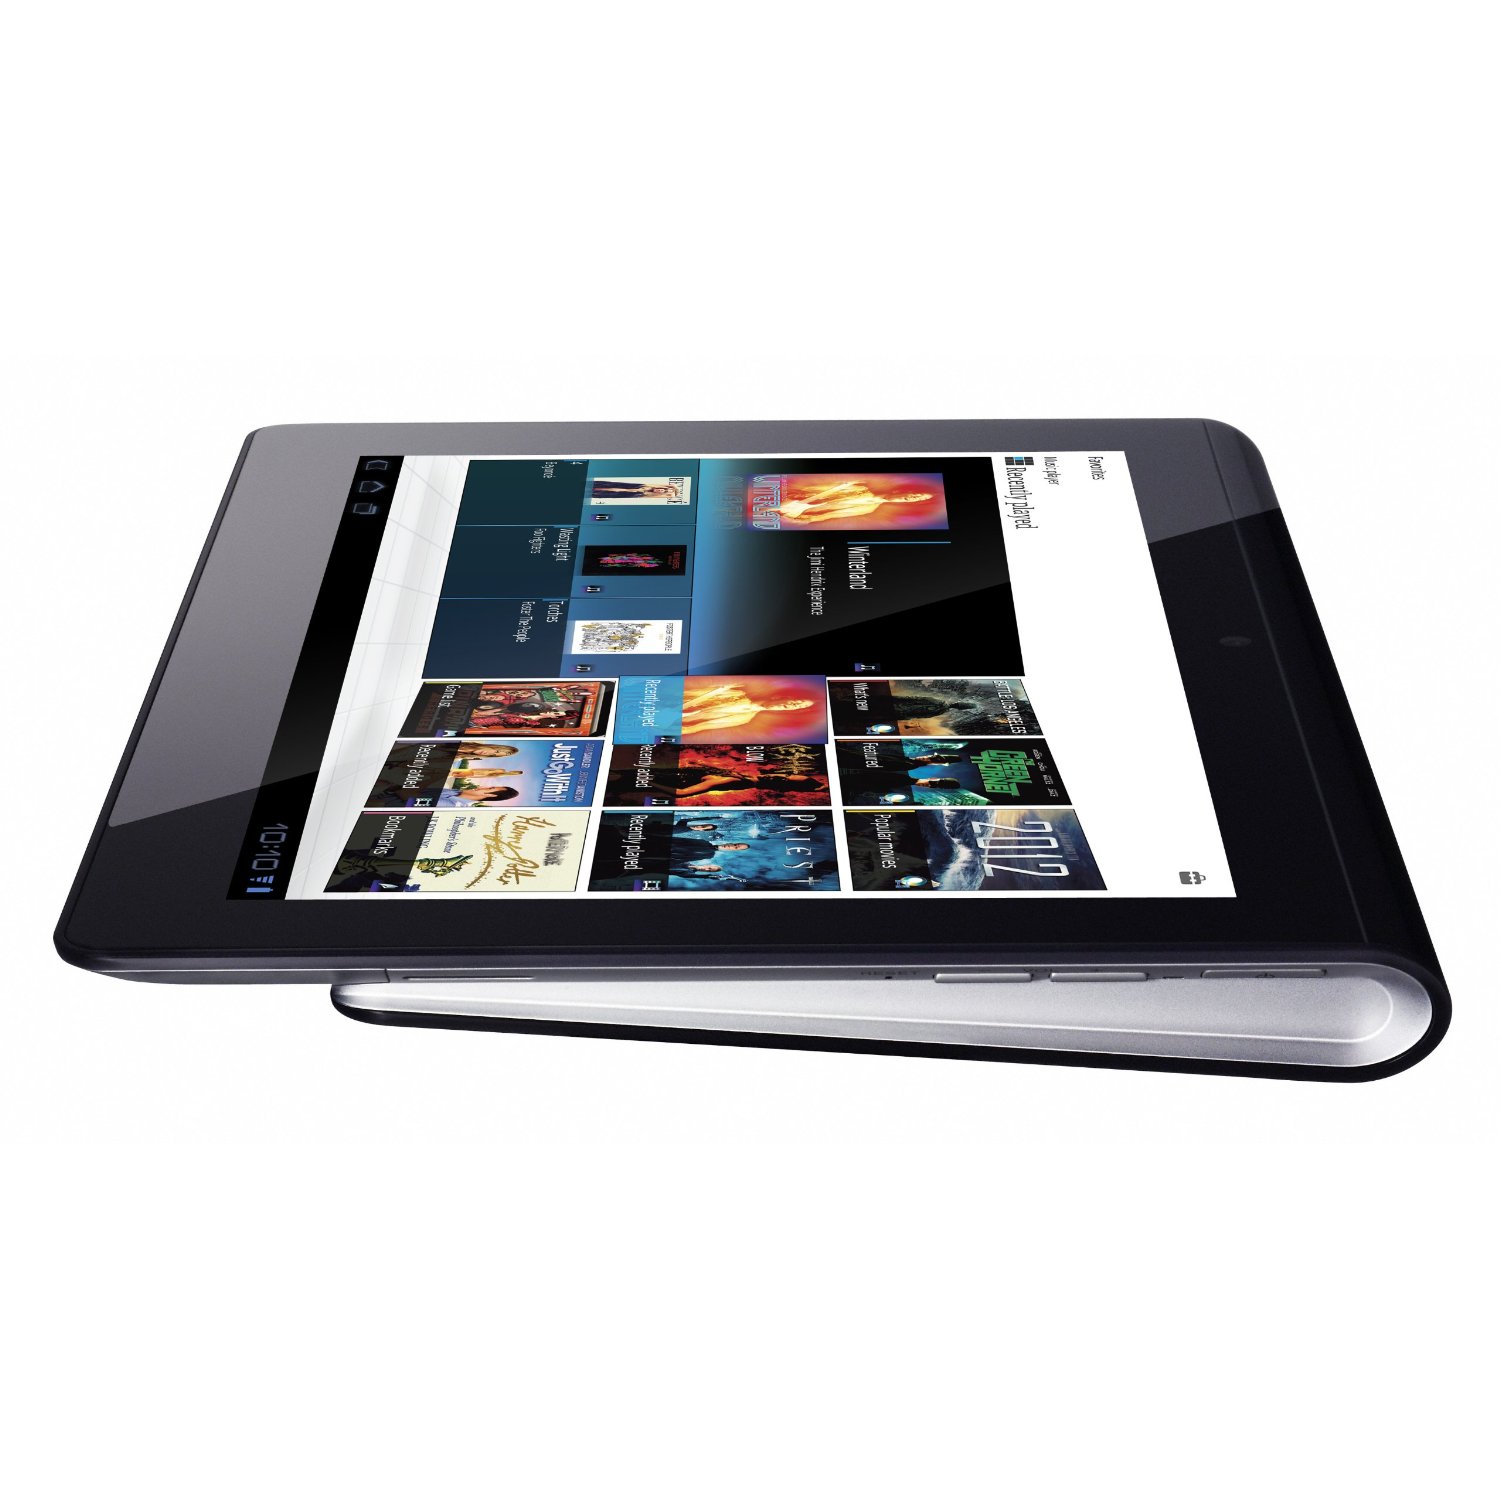 http://thetechjournal.com/wp-content/uploads/images/1109/1316407190-sony-sgpt111uss-wifi-16gb-tablet-9.jpg